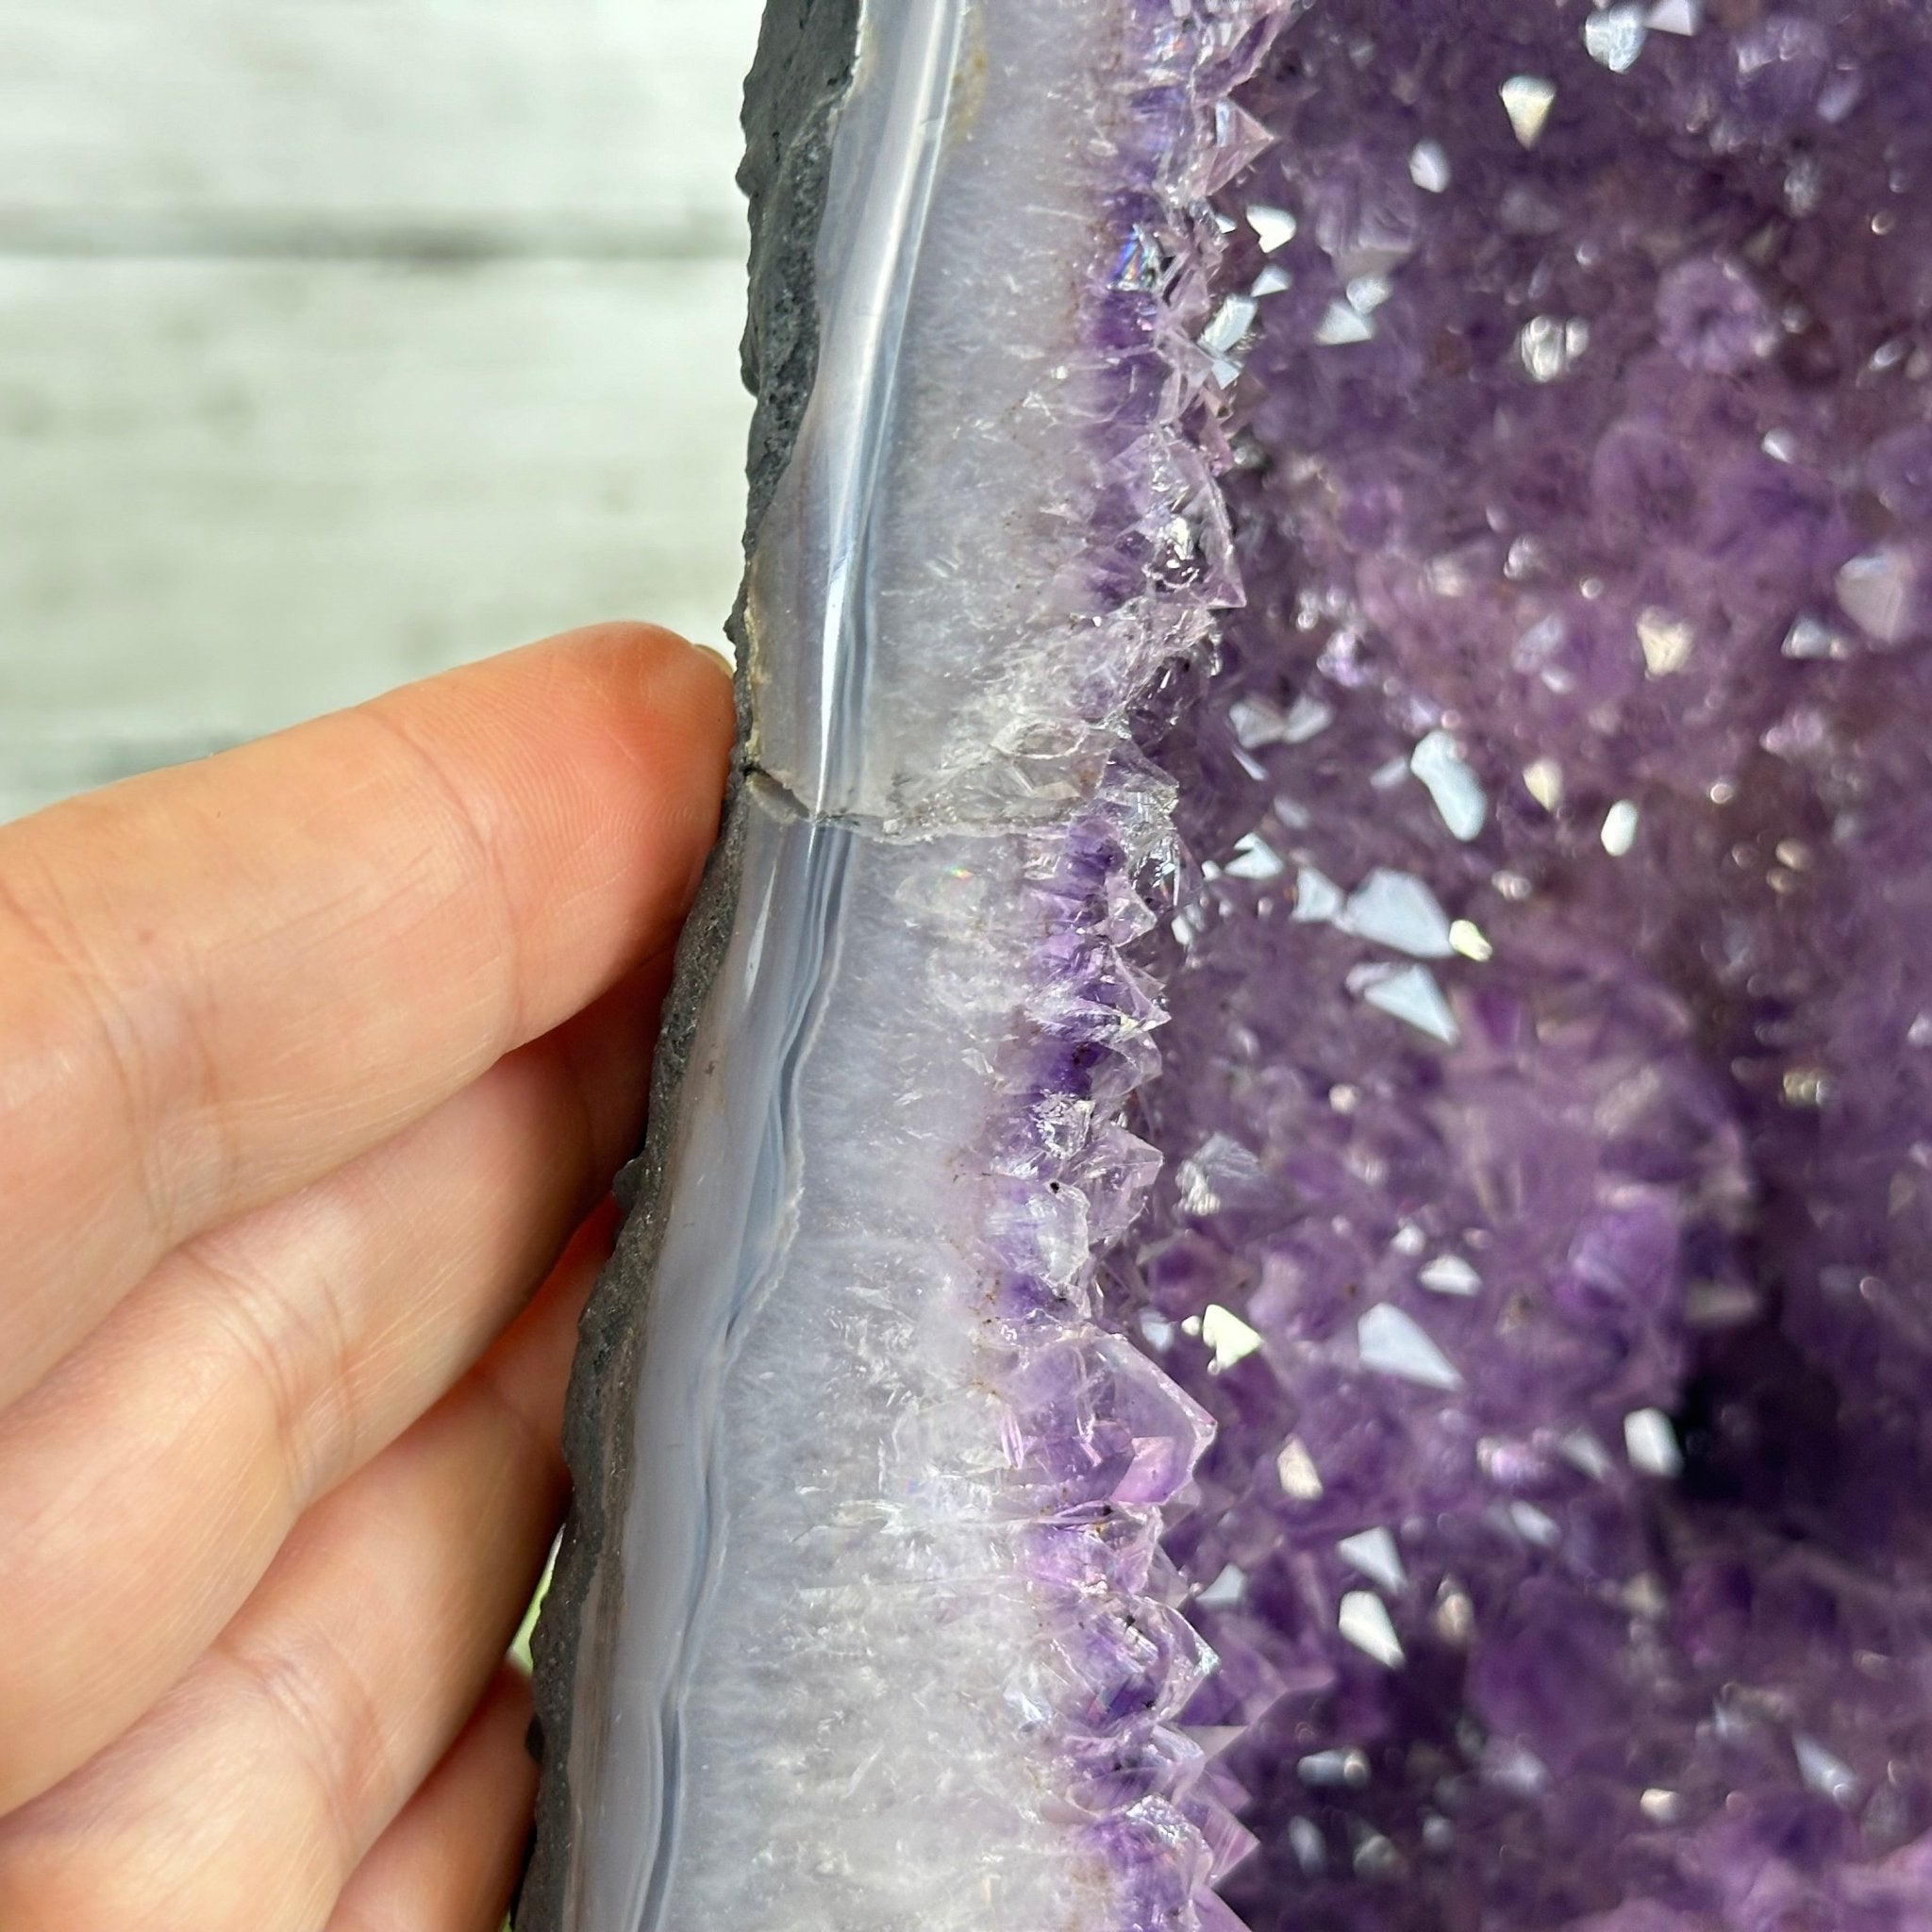 Quality Brazilian Amethyst Cathedral, 13.5 lbs & 10.9" Tall, #5601 - 1363 - Brazil GemsBrazil GemsQuality Brazilian Amethyst Cathedral, 13.5 lbs & 10.9" Tall, #5601 - 1363Cathedrals5601 - 1363